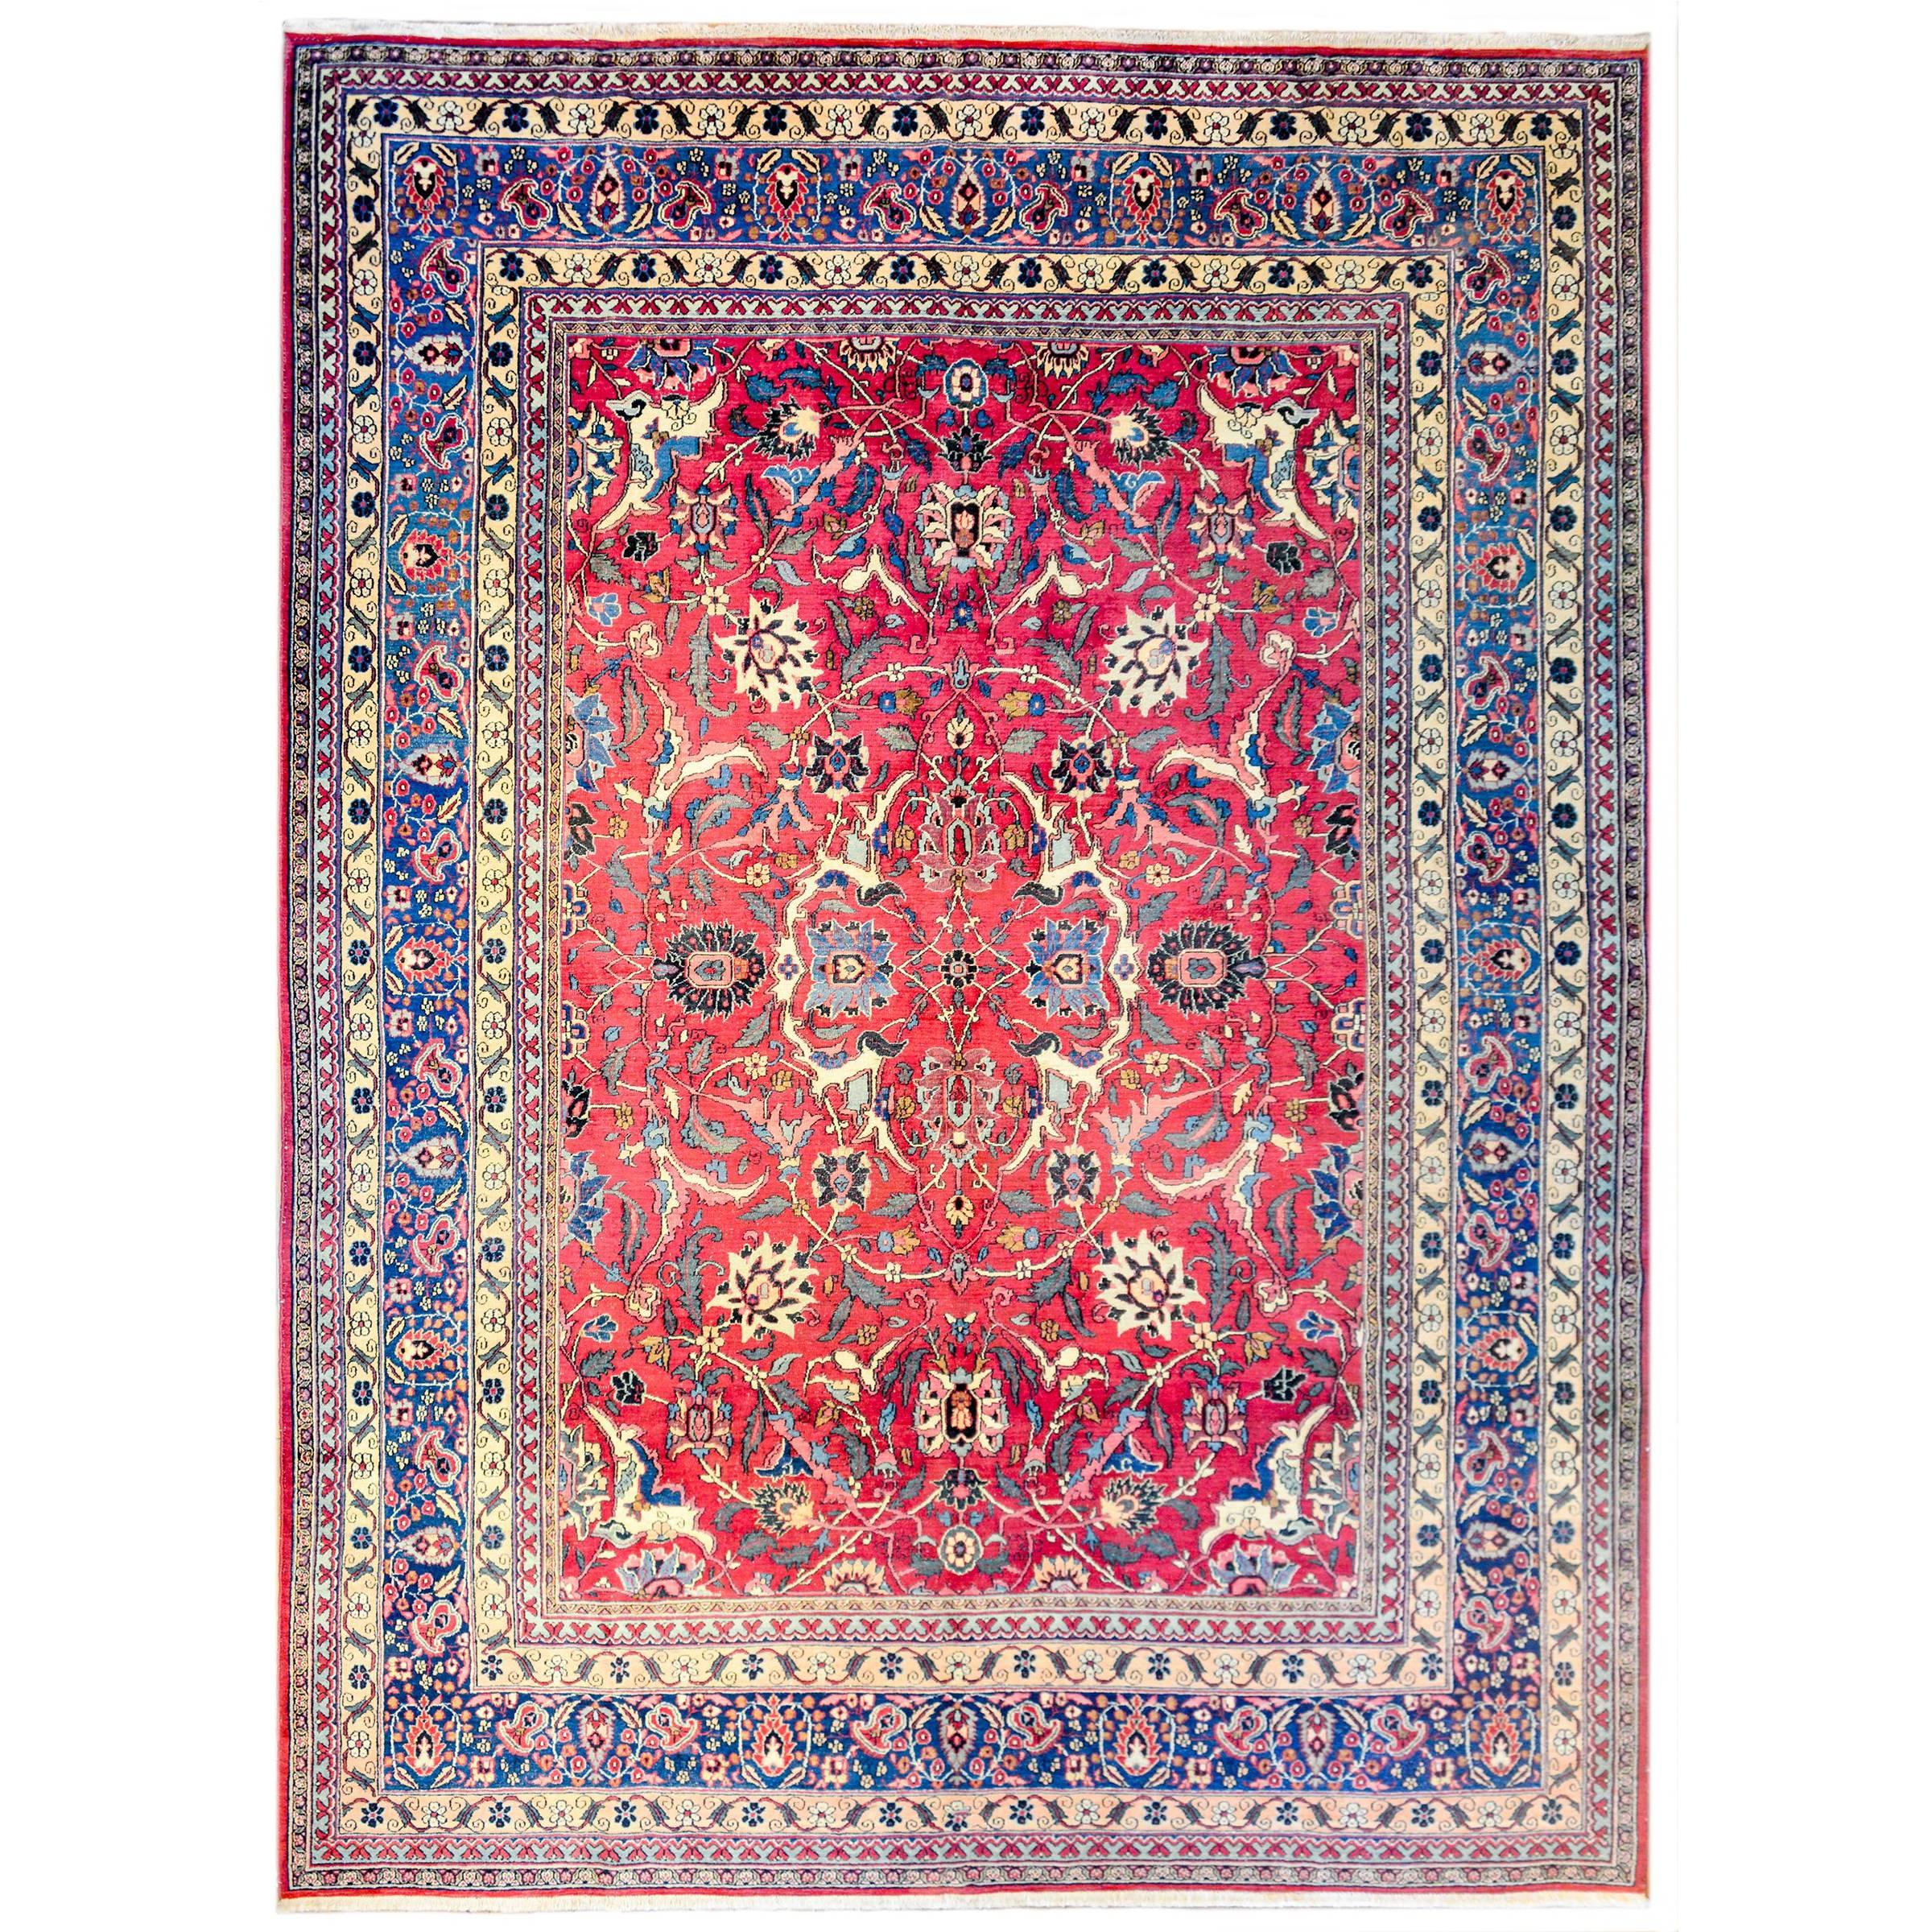 Magnificent Early 20th Century Dorokhsh Rug